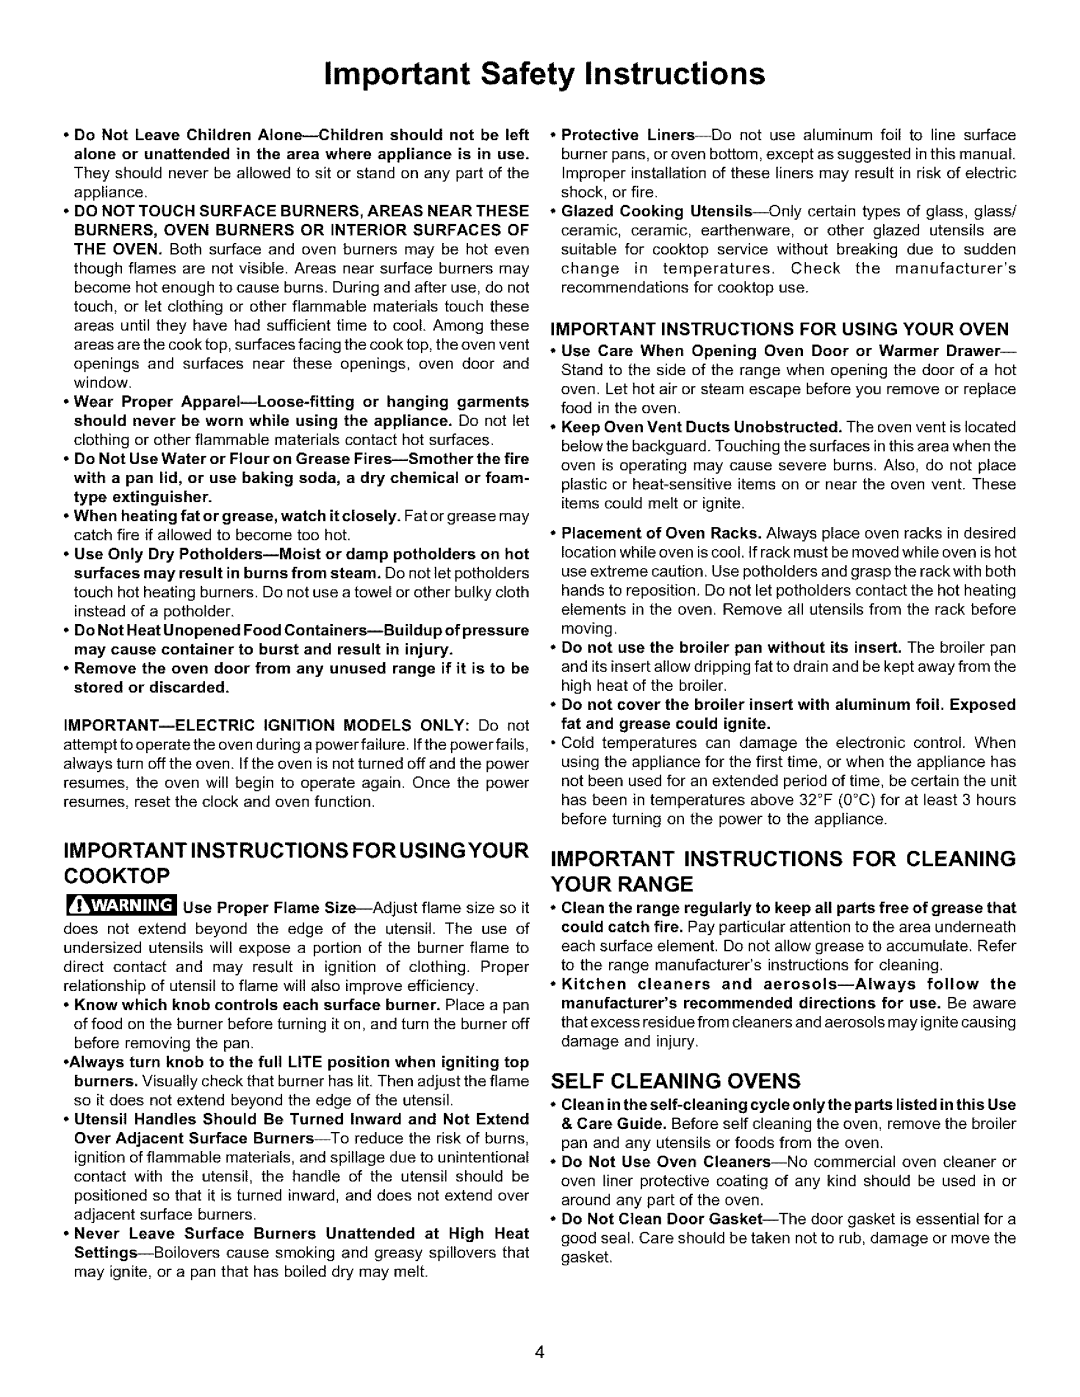 Kenmore 790.75609 manual Important Safety Instructions, Important Instructions For Using Your Cooktop, Self Cleaning Ovens 